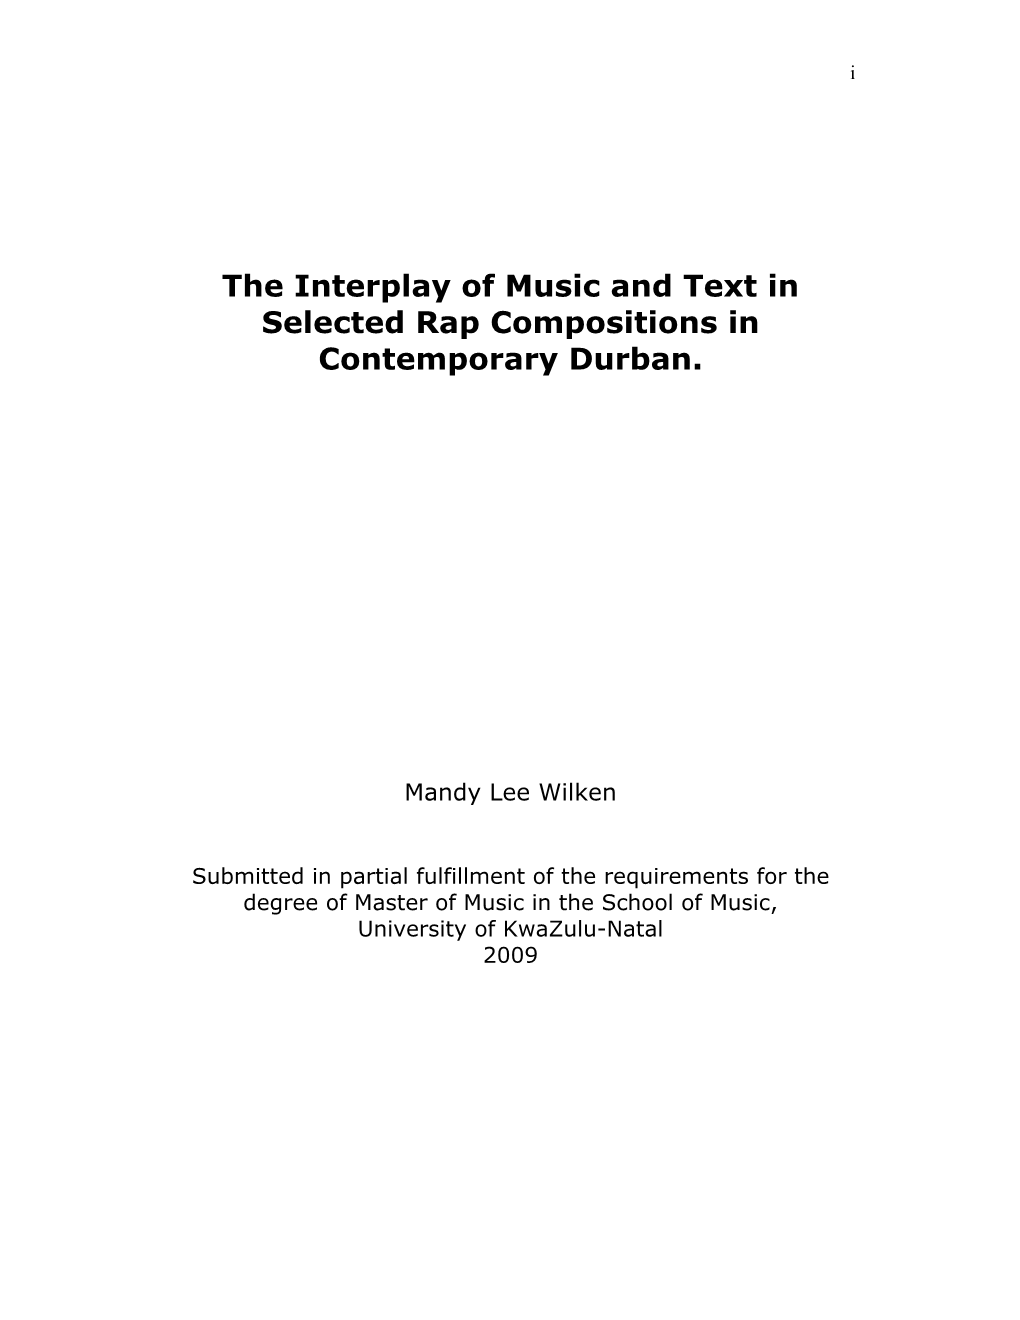 The Interplay of Music and Text in Selected Rap Compositions in Contemporary Durban